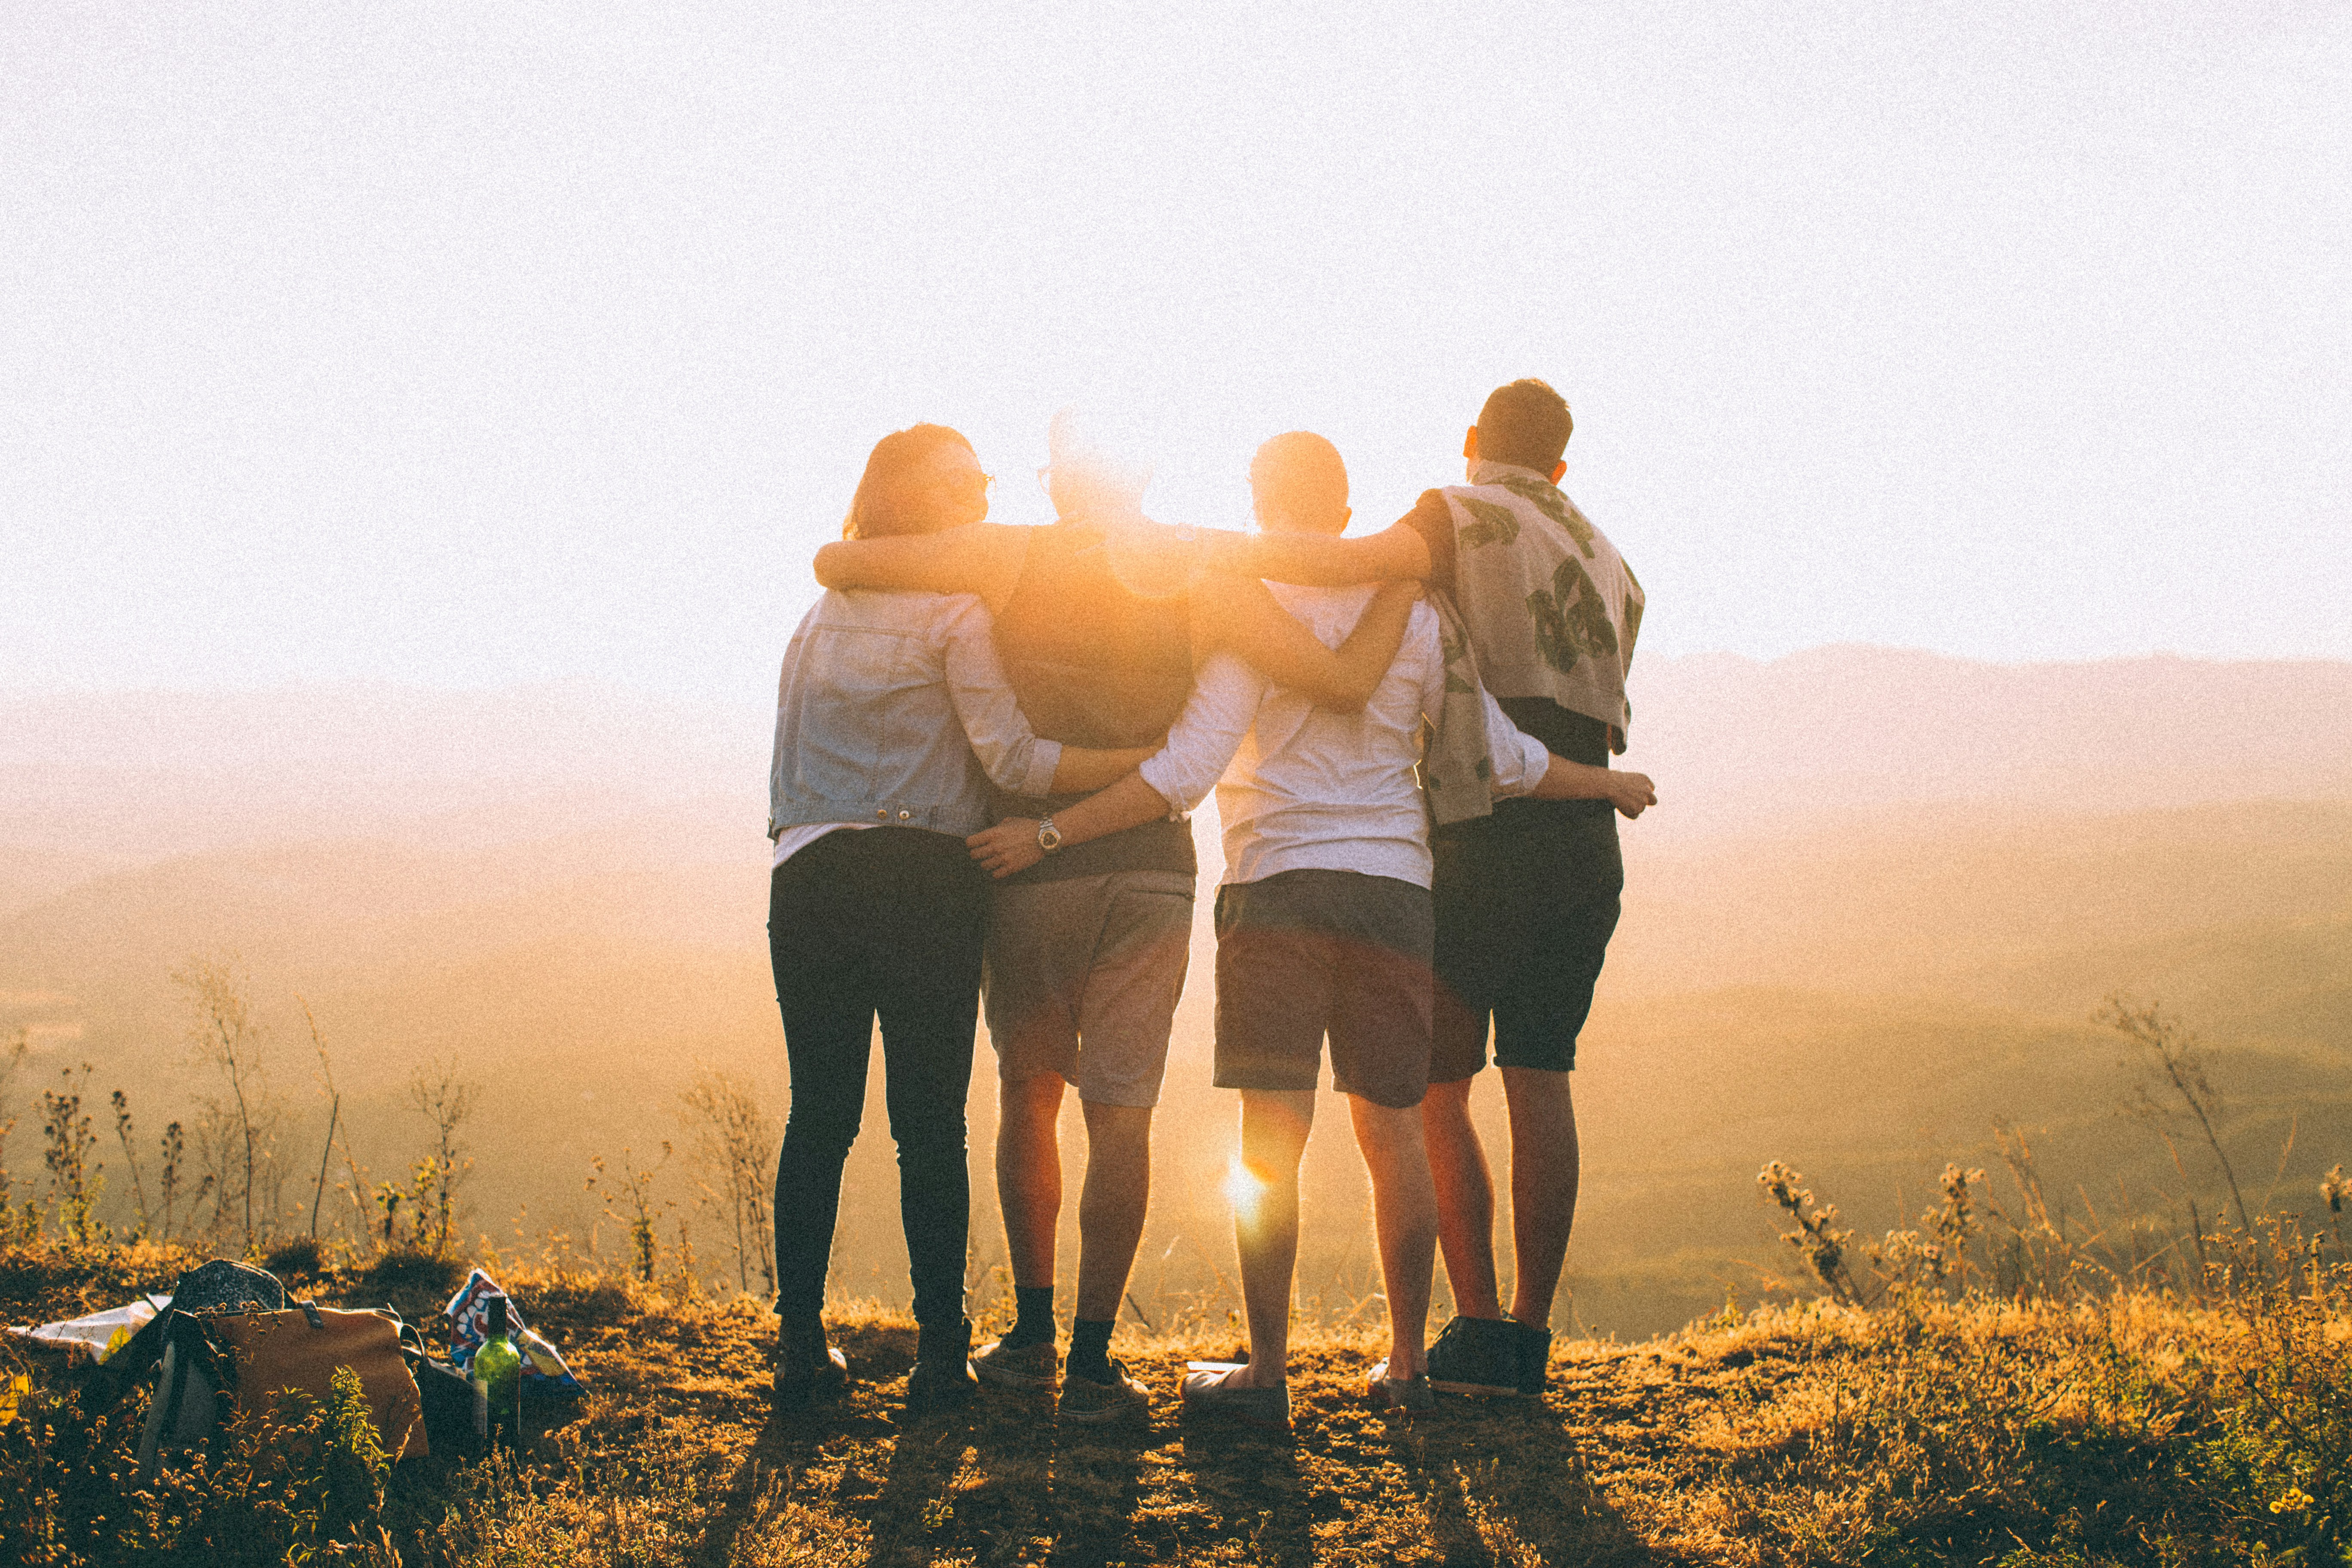 Four people with arms joined facing sunrise